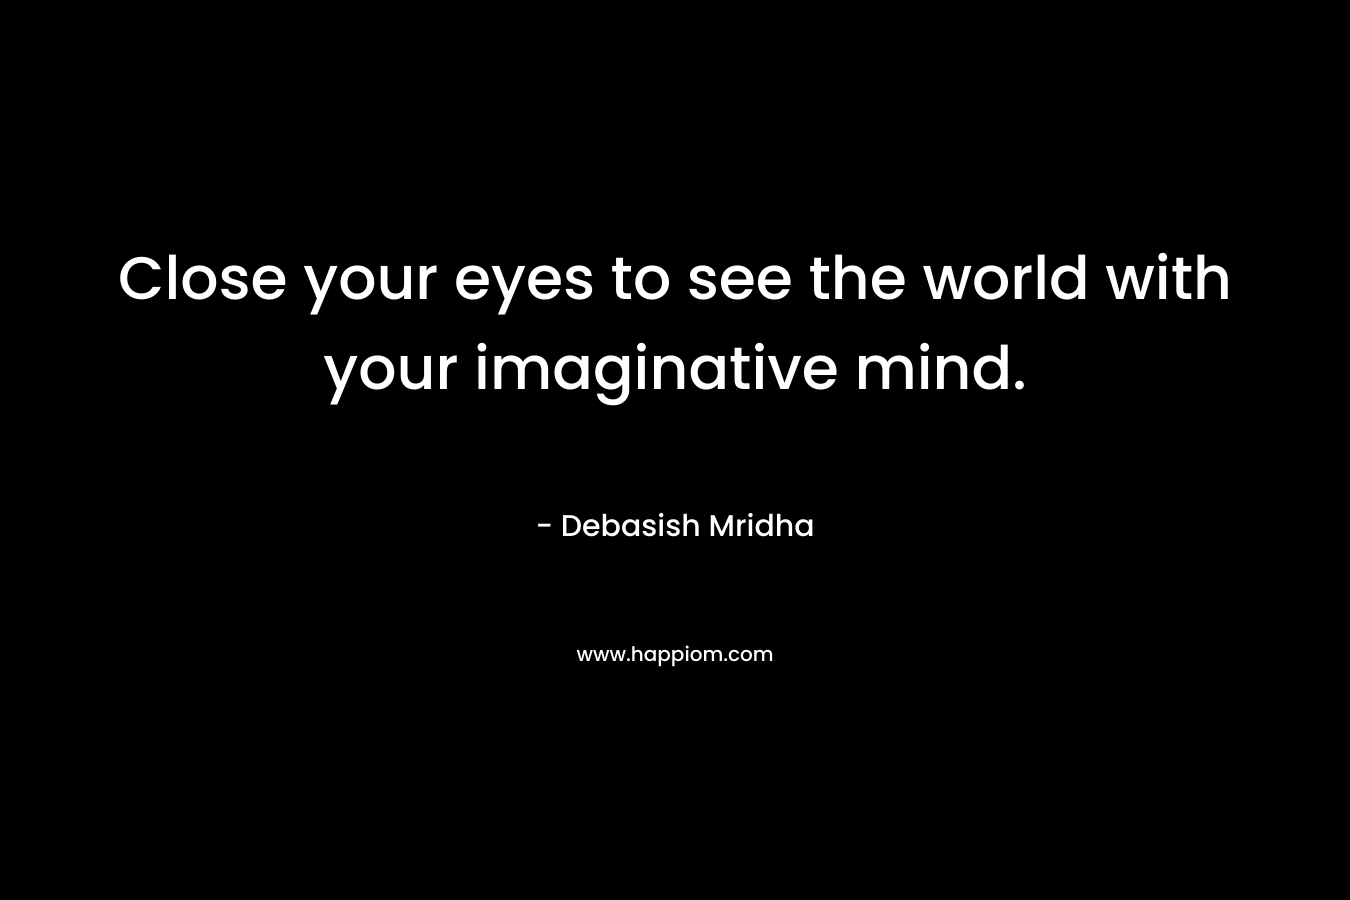 Close your eyes to see the world with your imaginative mind.